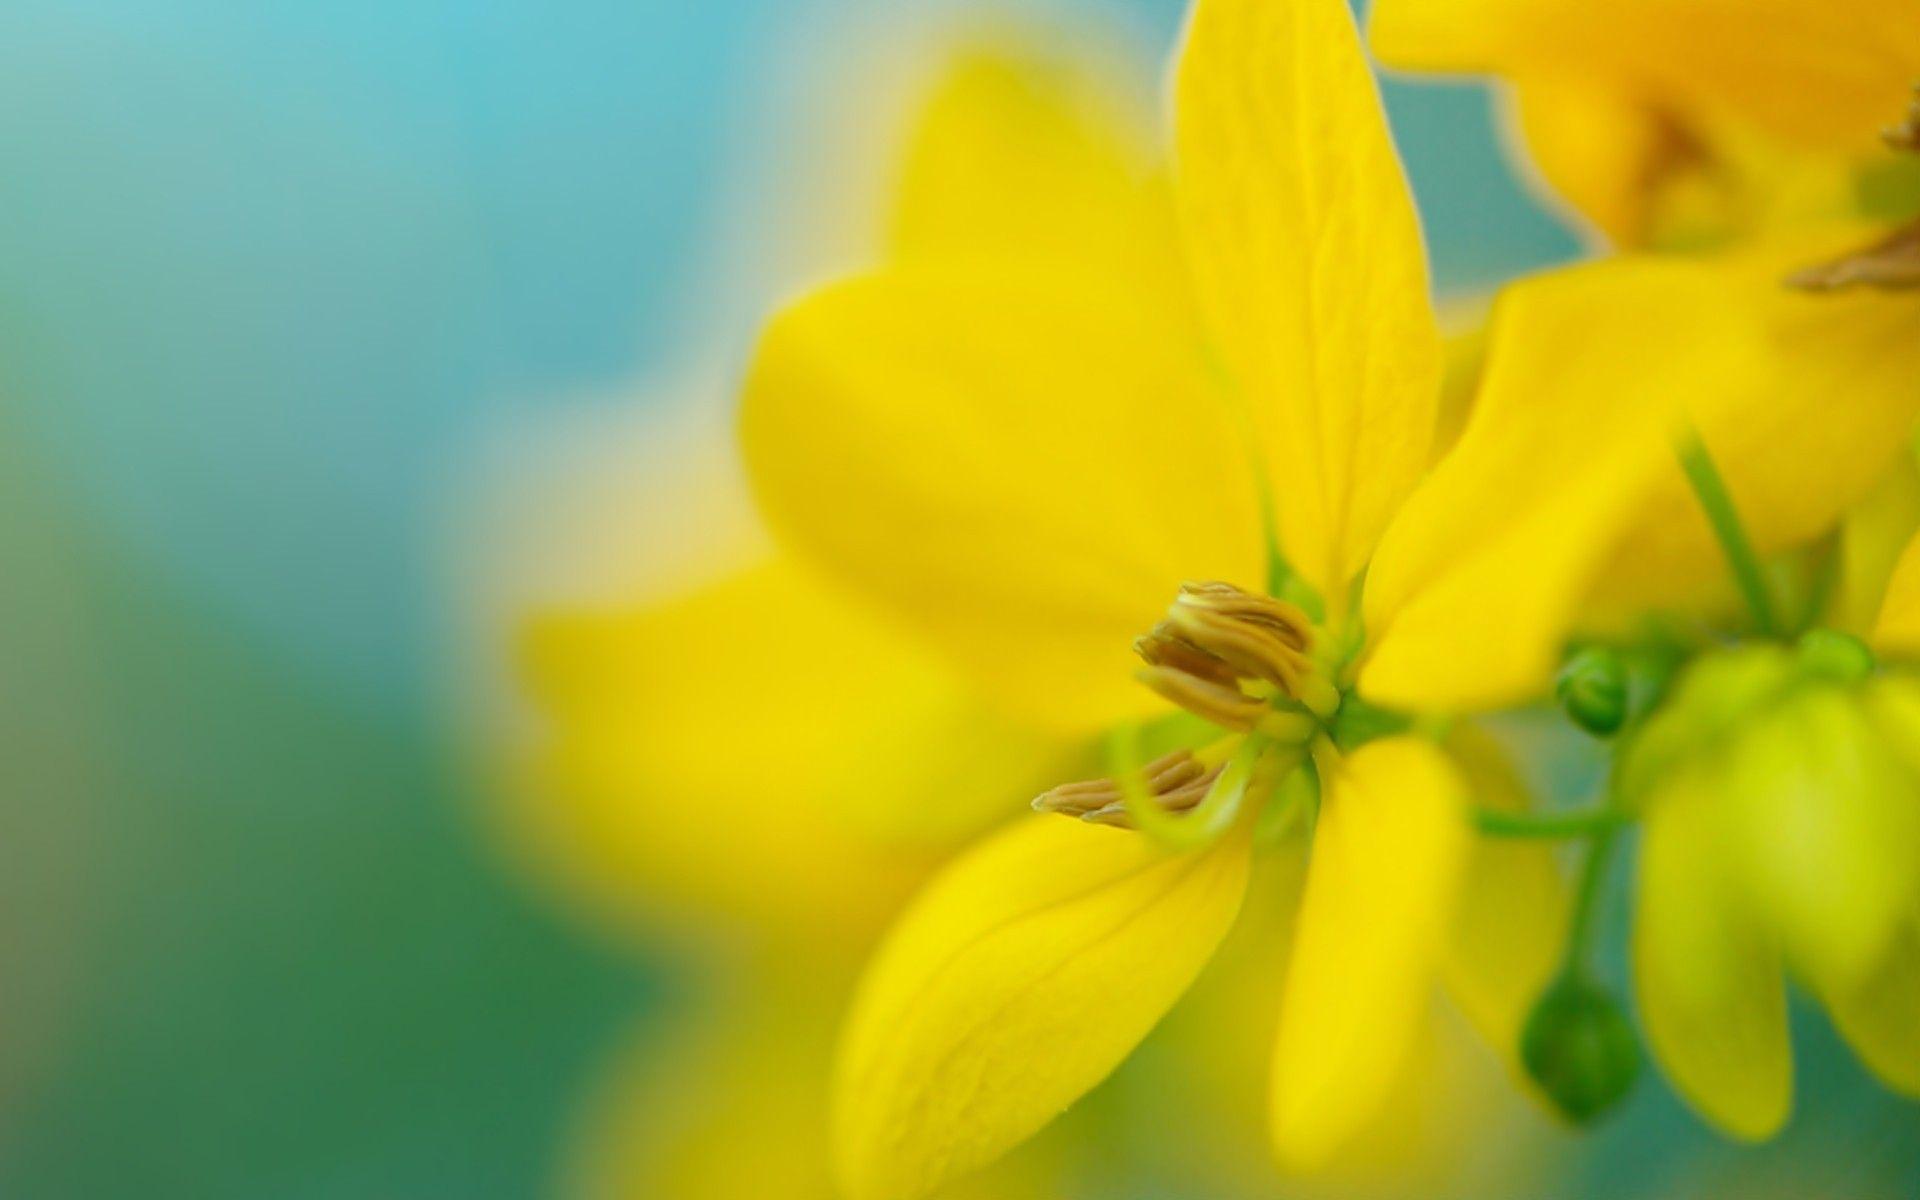 Yellow flower on a blurred background wallpaper and image